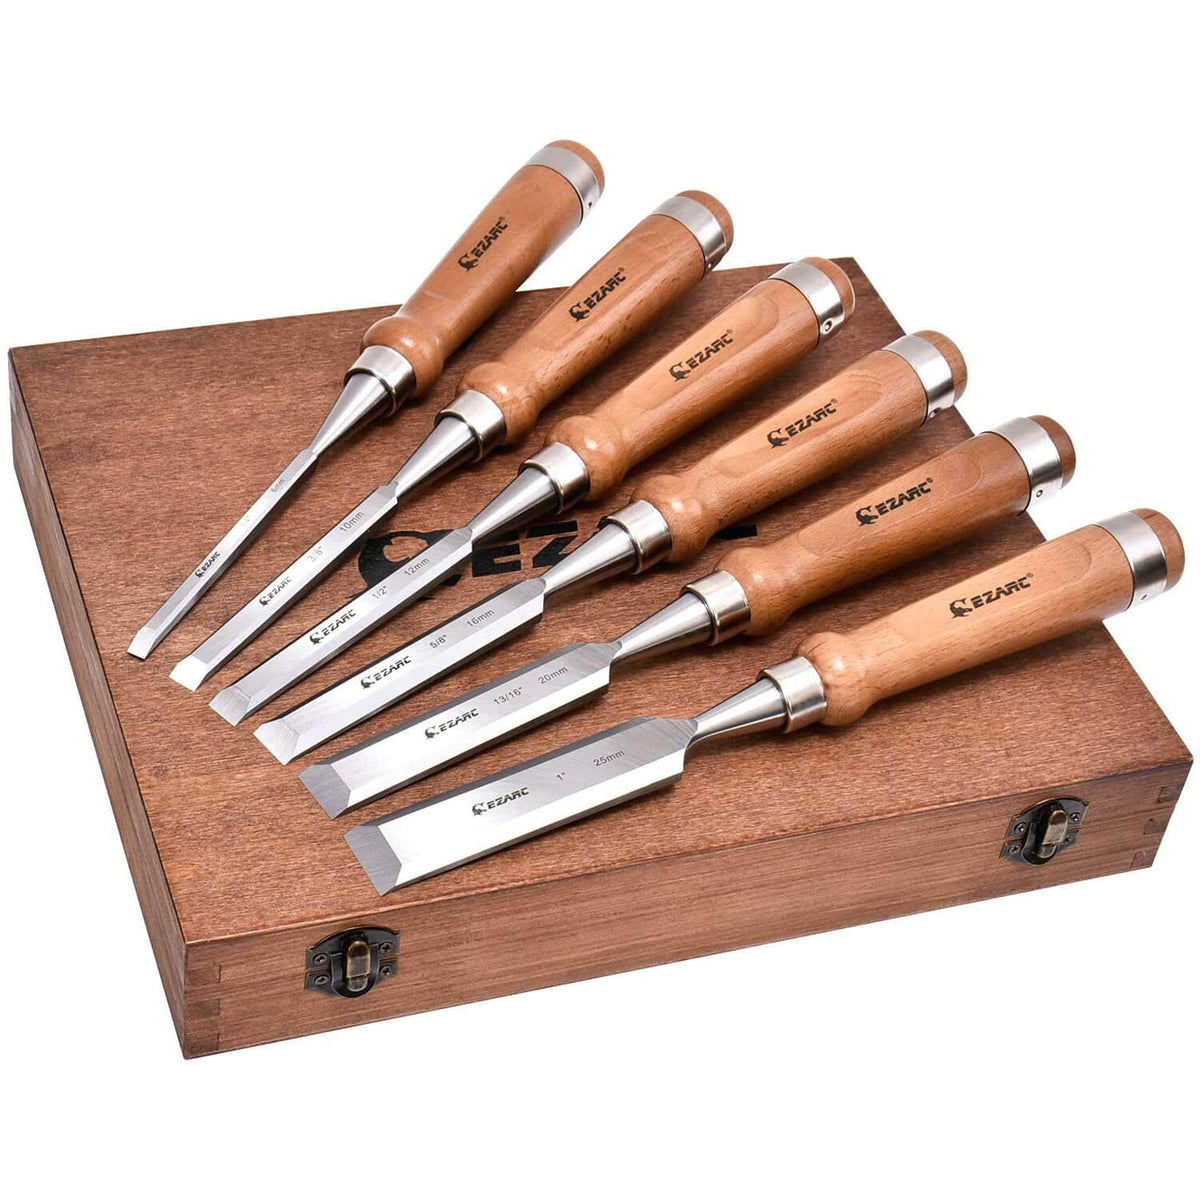 Pack of 12 chisels Precision Blades and Wooden Handles Wood carving chisels 